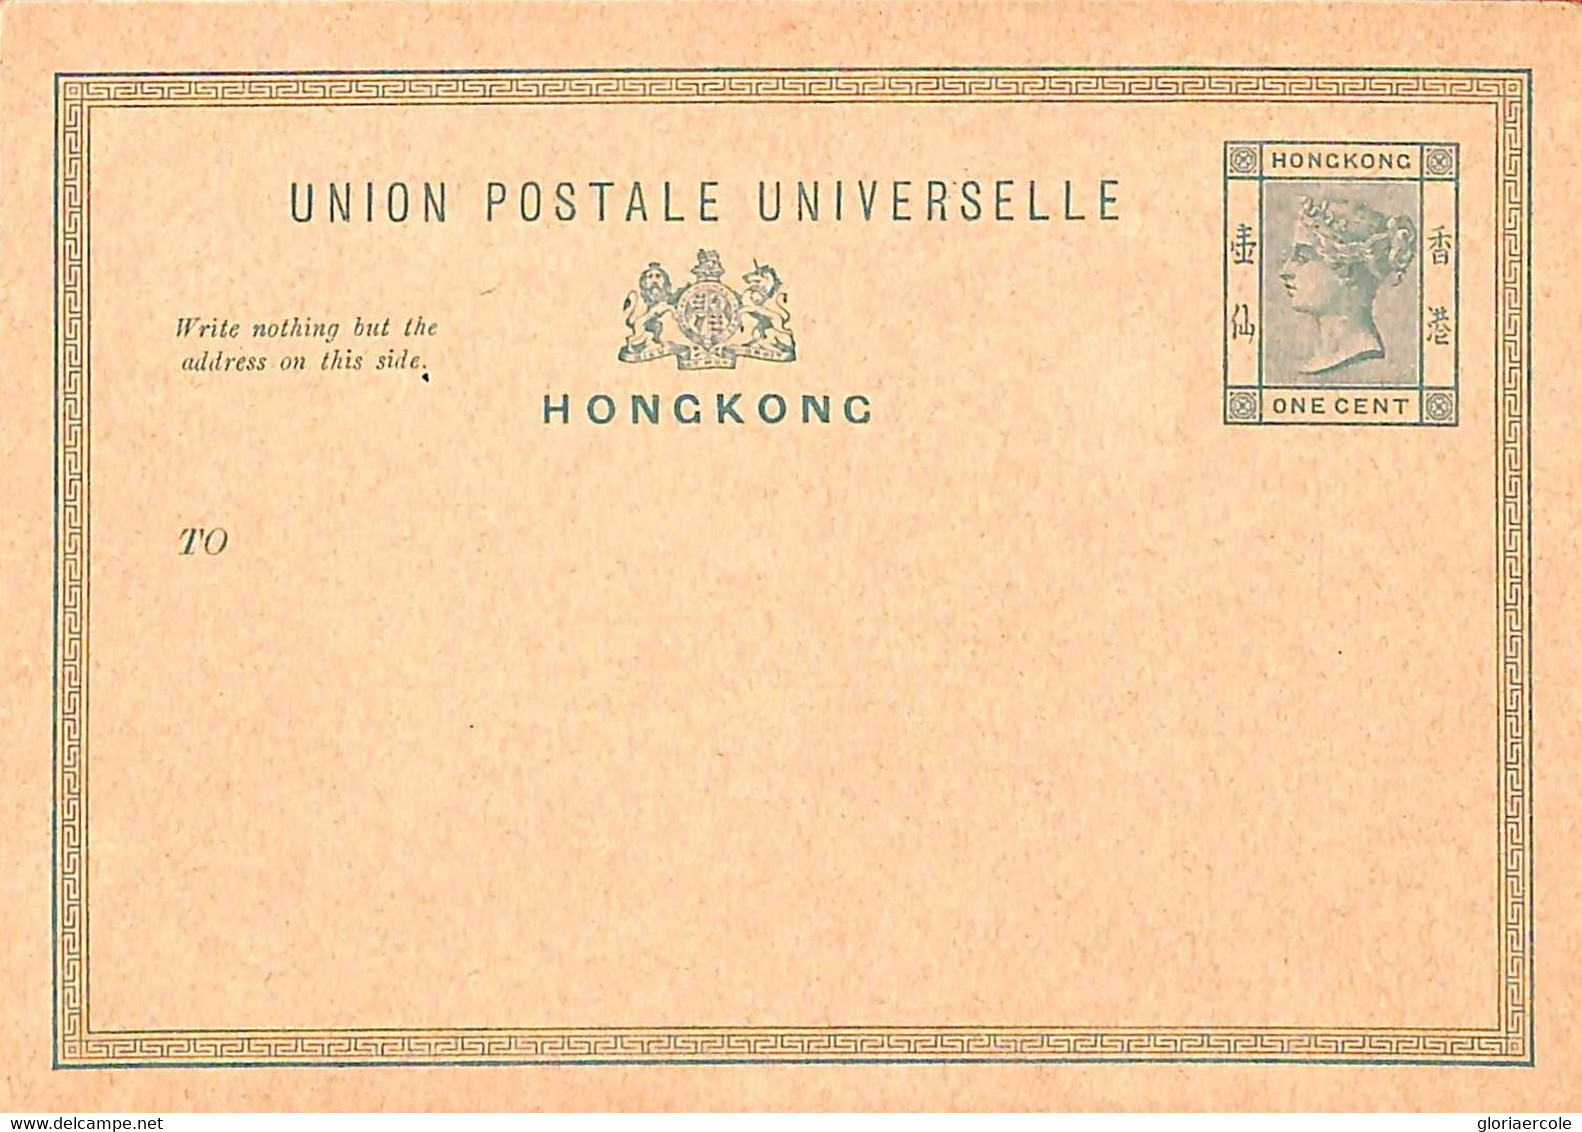 Aa6768 - HONG KONG - POSTAL HISTORY -  Postal STATIONERY CARD  1 Cent - Entiers Postaux